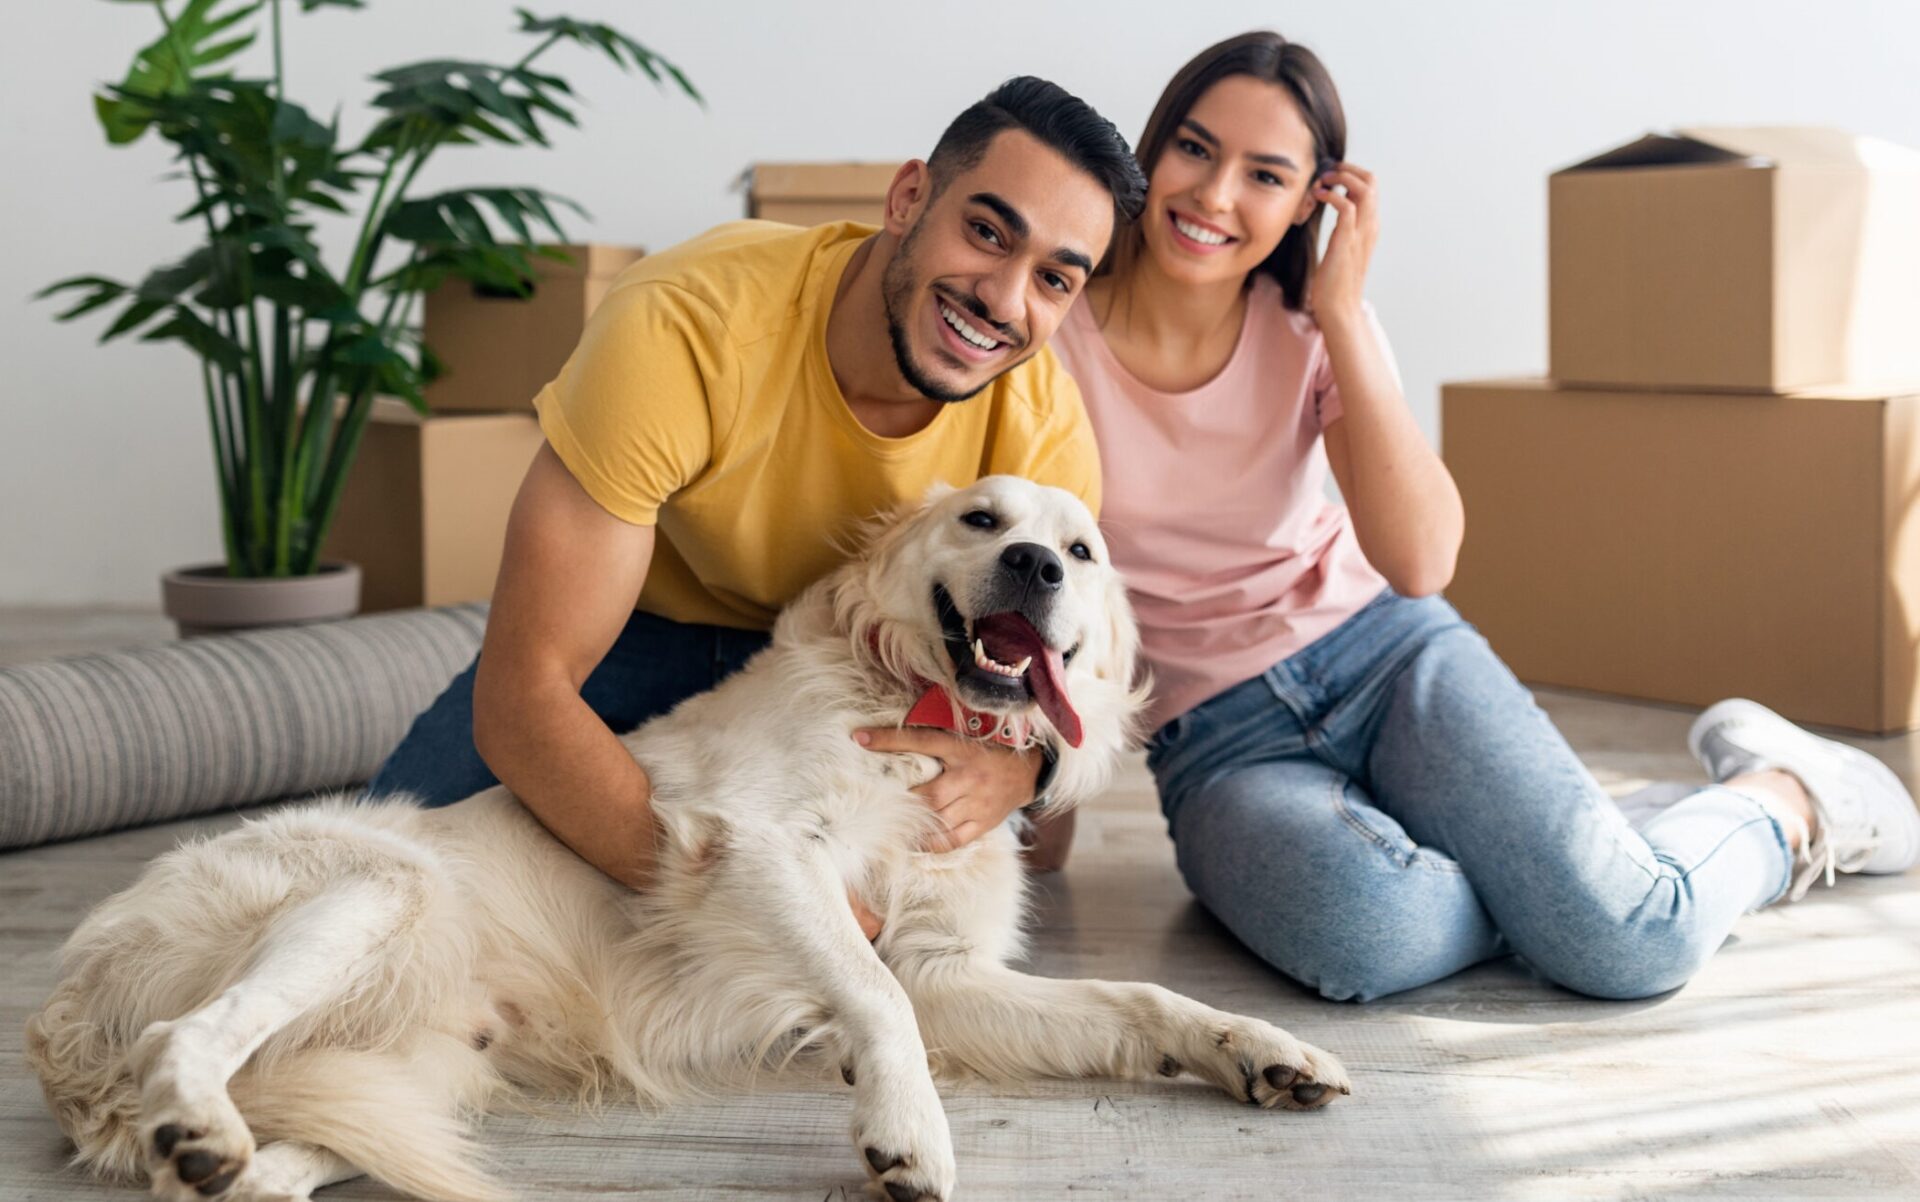 Pet Owners Would Pass On Their Dream Home If It Wasn’t Animal-Friendly